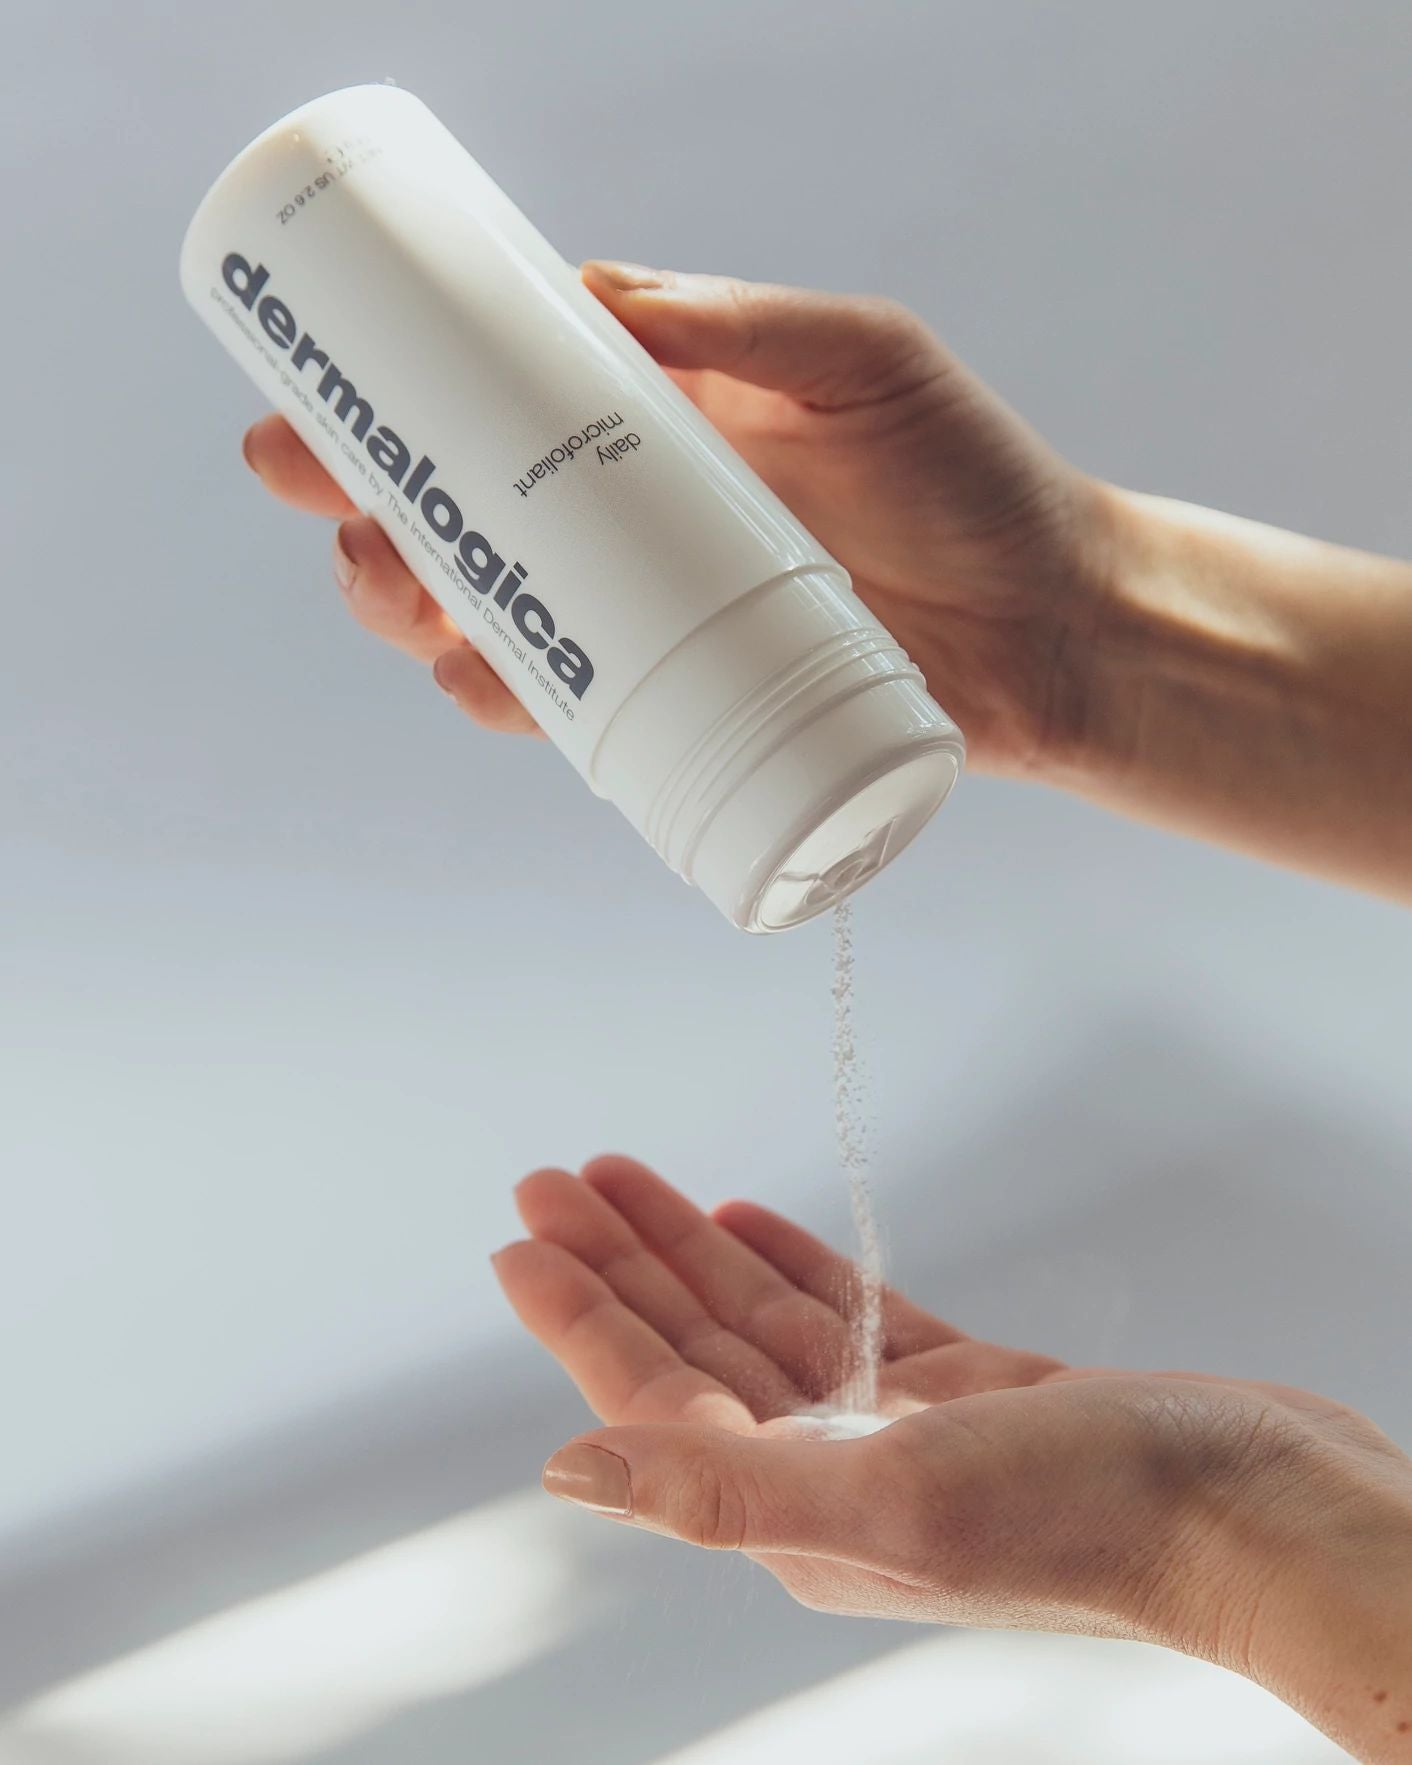 dos and don’ts of exfoliation, Dermalogica India